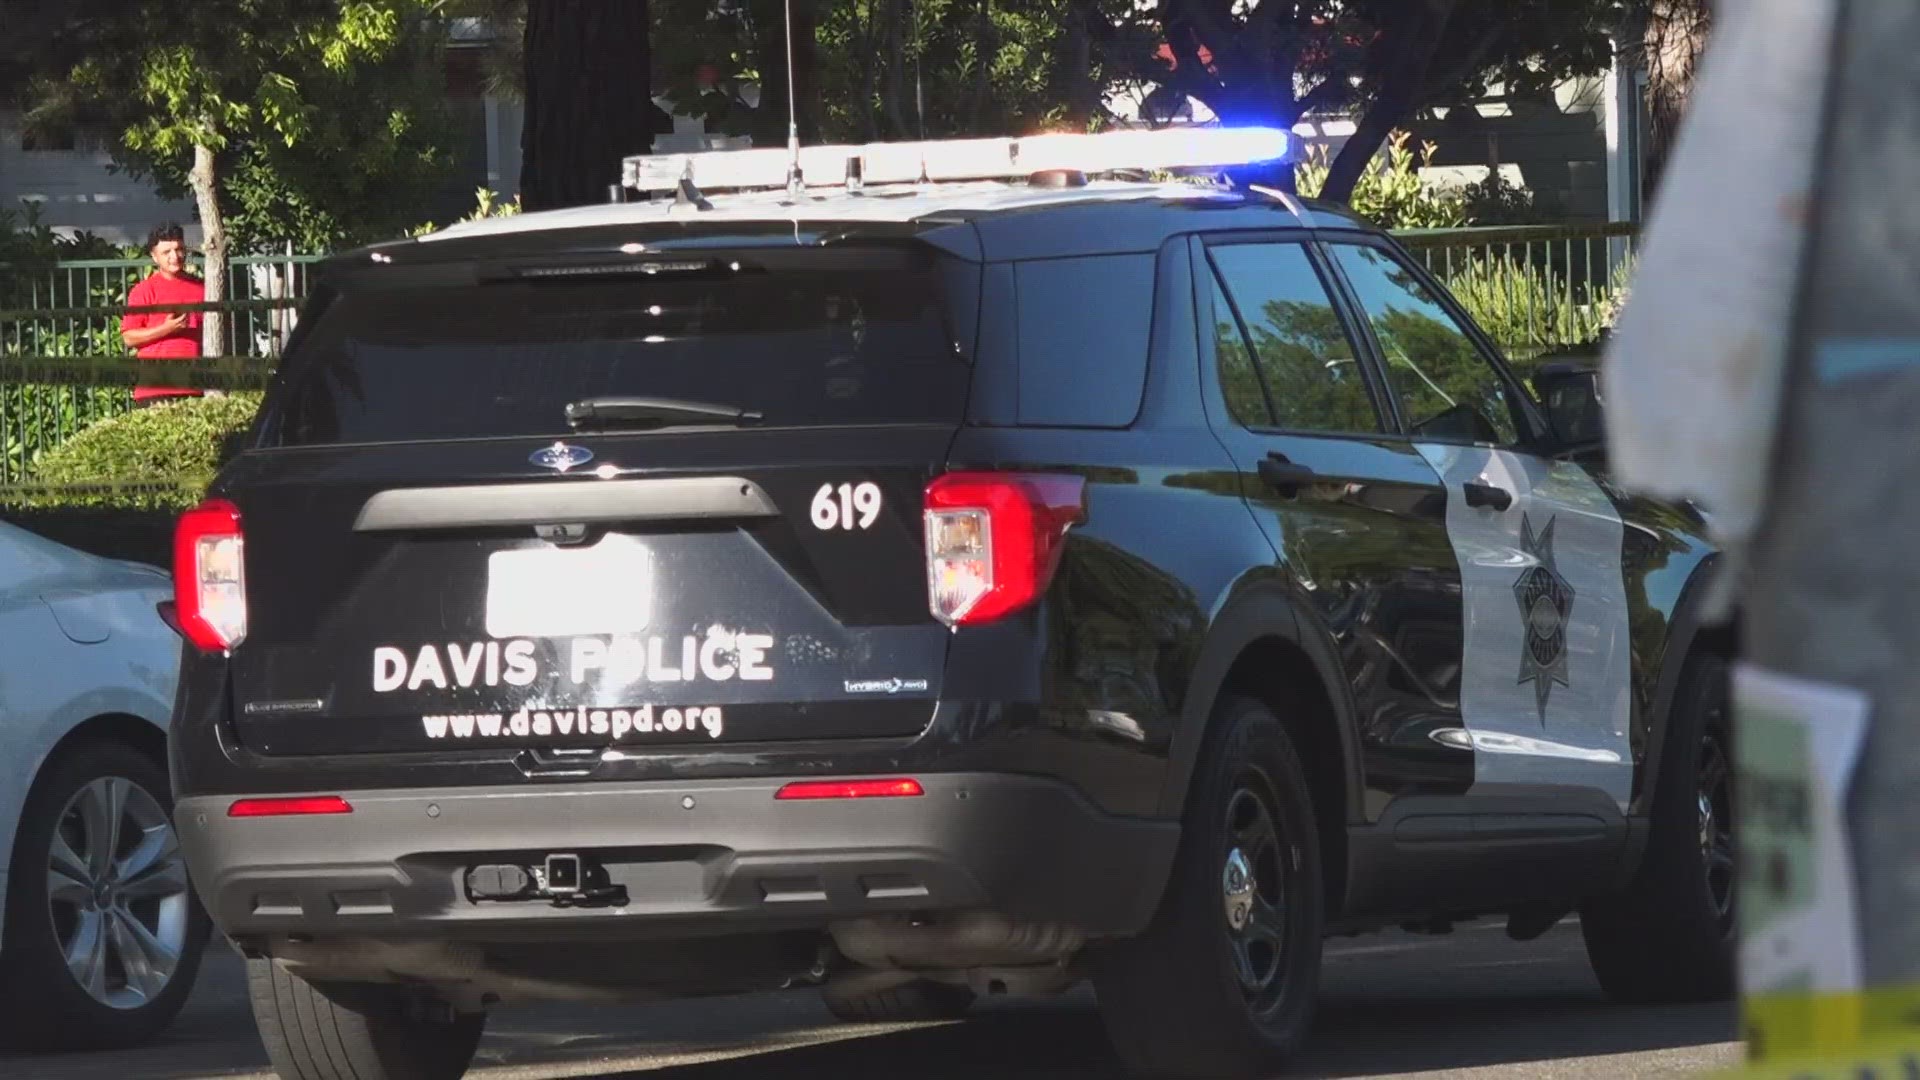 A married couple in Davis are in the hospital after an alleged domestic violence incident that left the man with at least one stab wound.